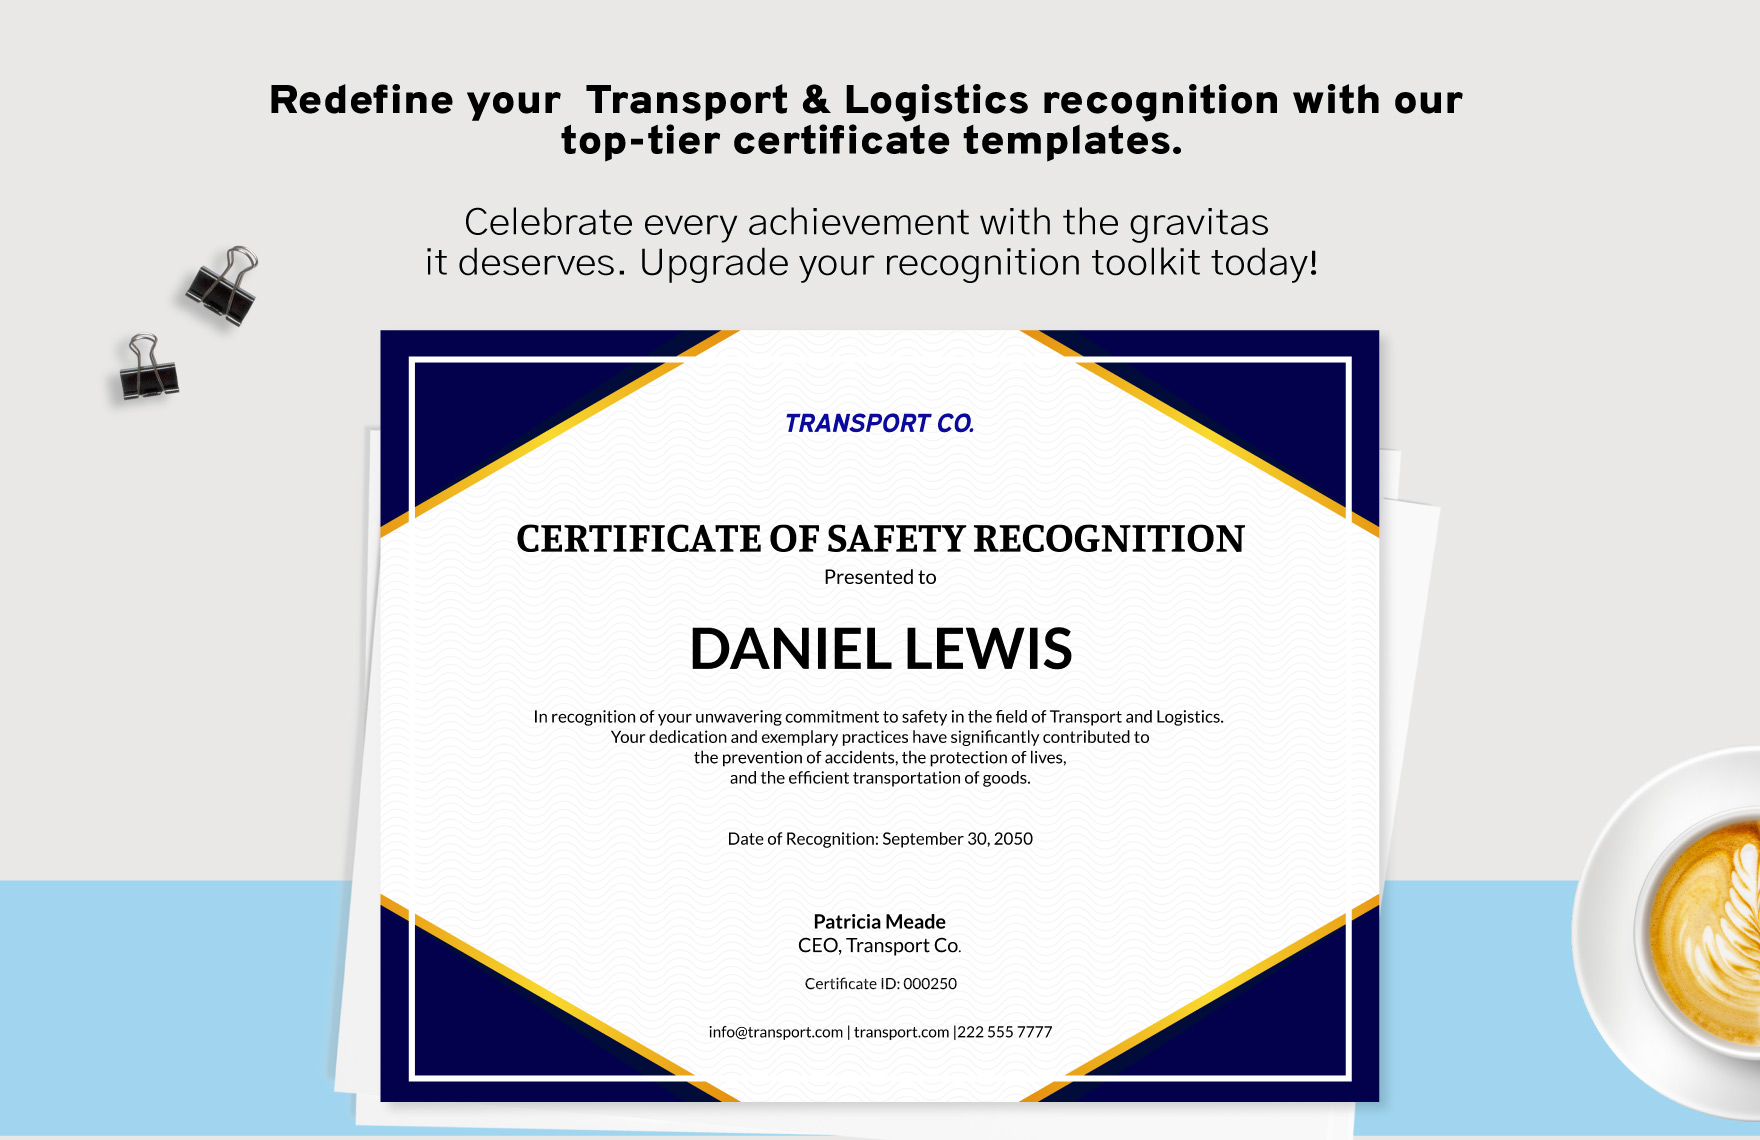 Transport and Logistics Safety Recognition Certificate Template